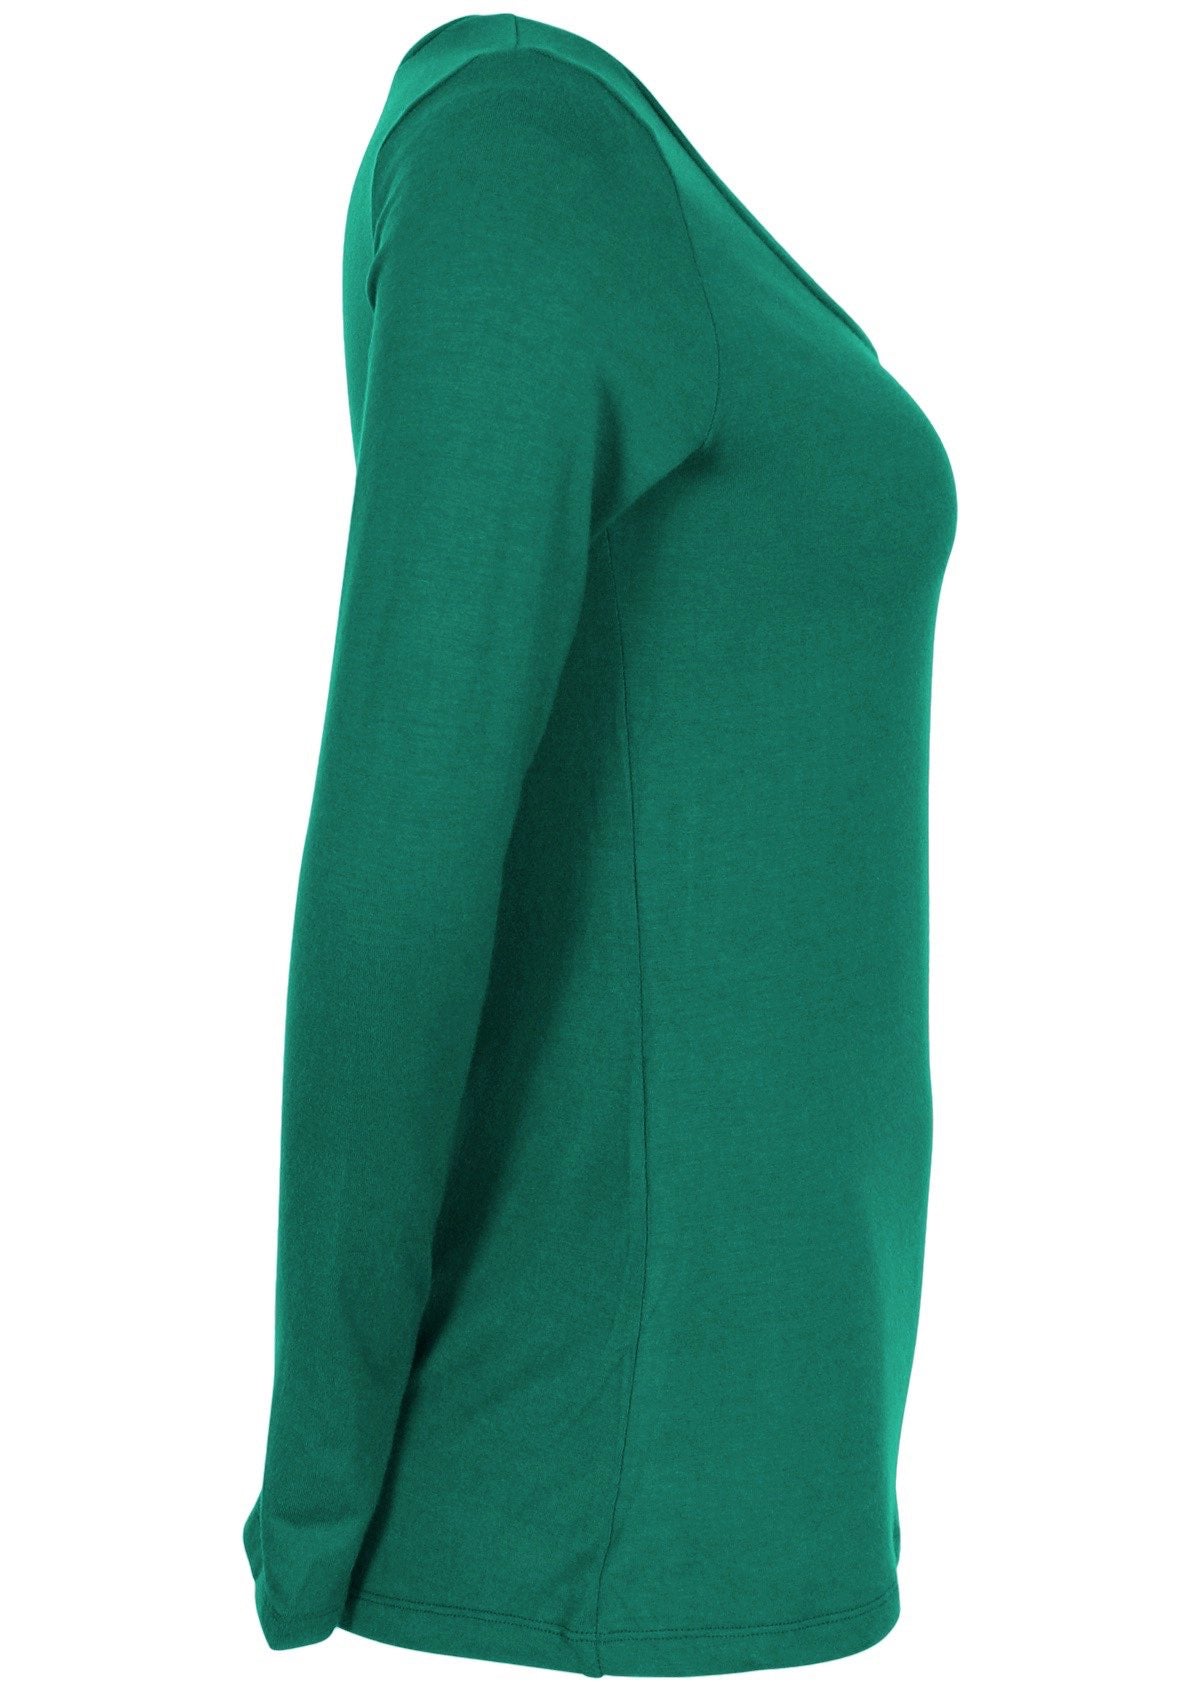 Side view of women's jade green long sleeve stretch v-neck soft rayon top.